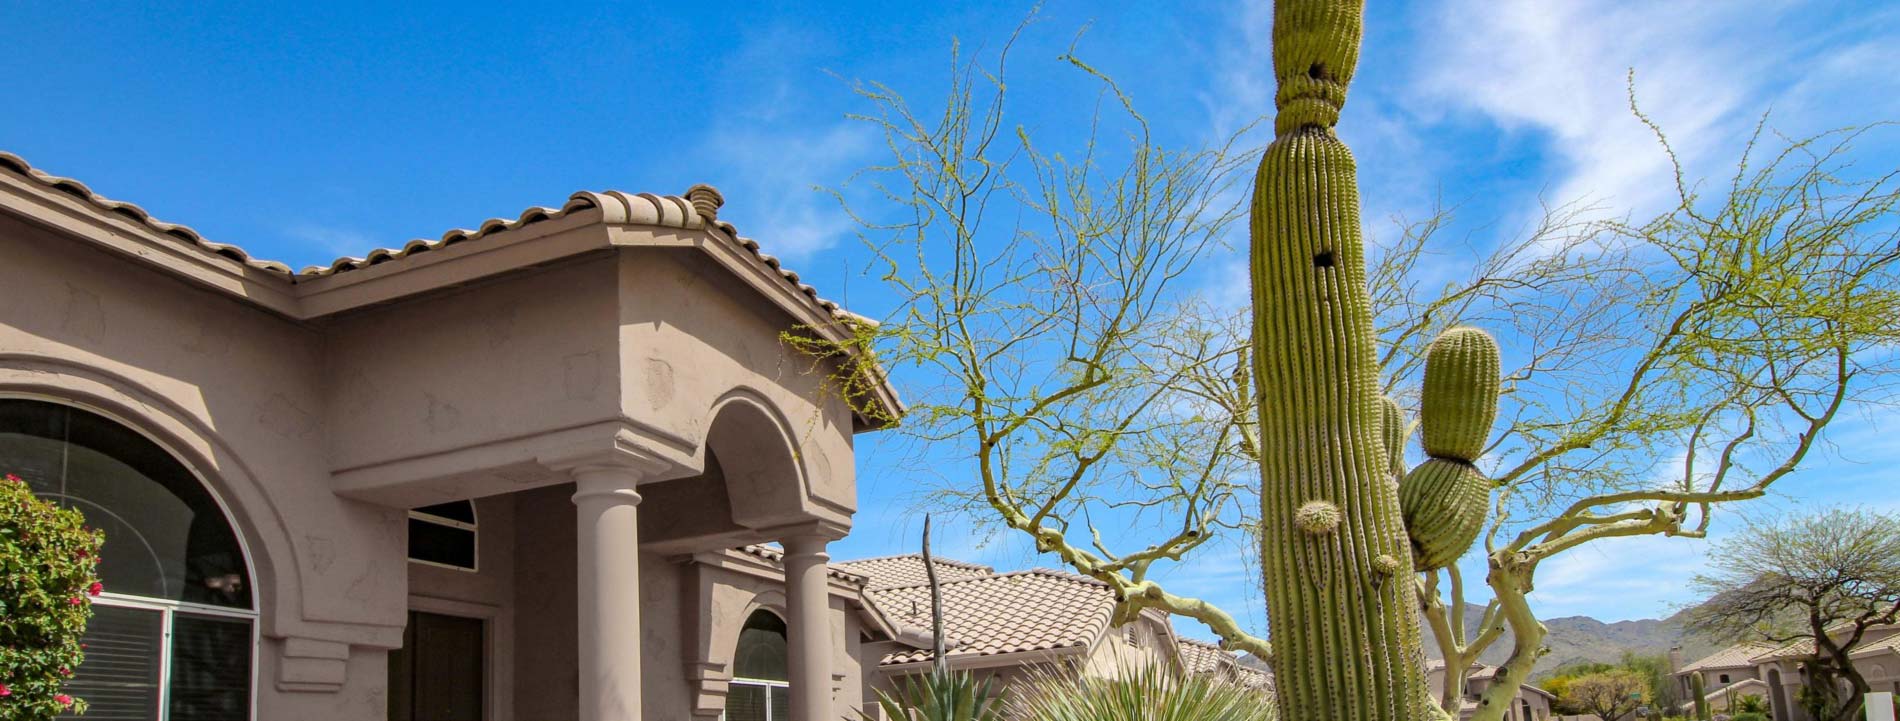 Home in Phoenix with Saguaro